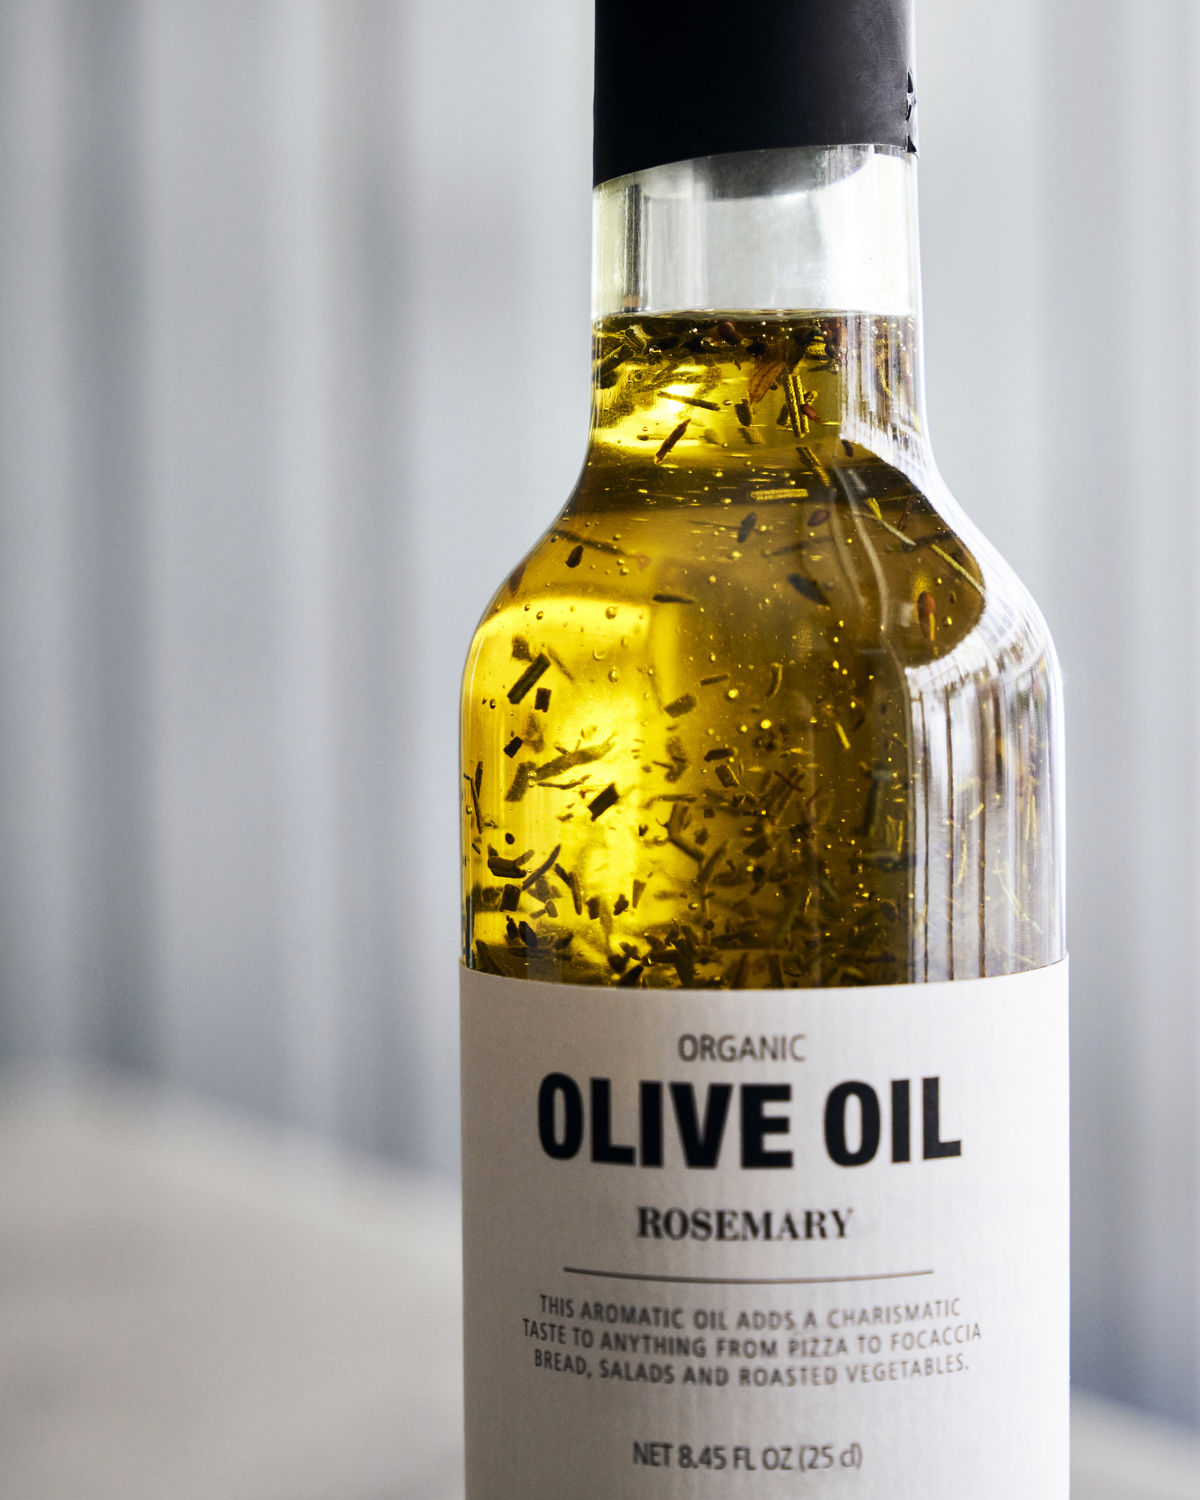 Organic olive oil with Rosemary